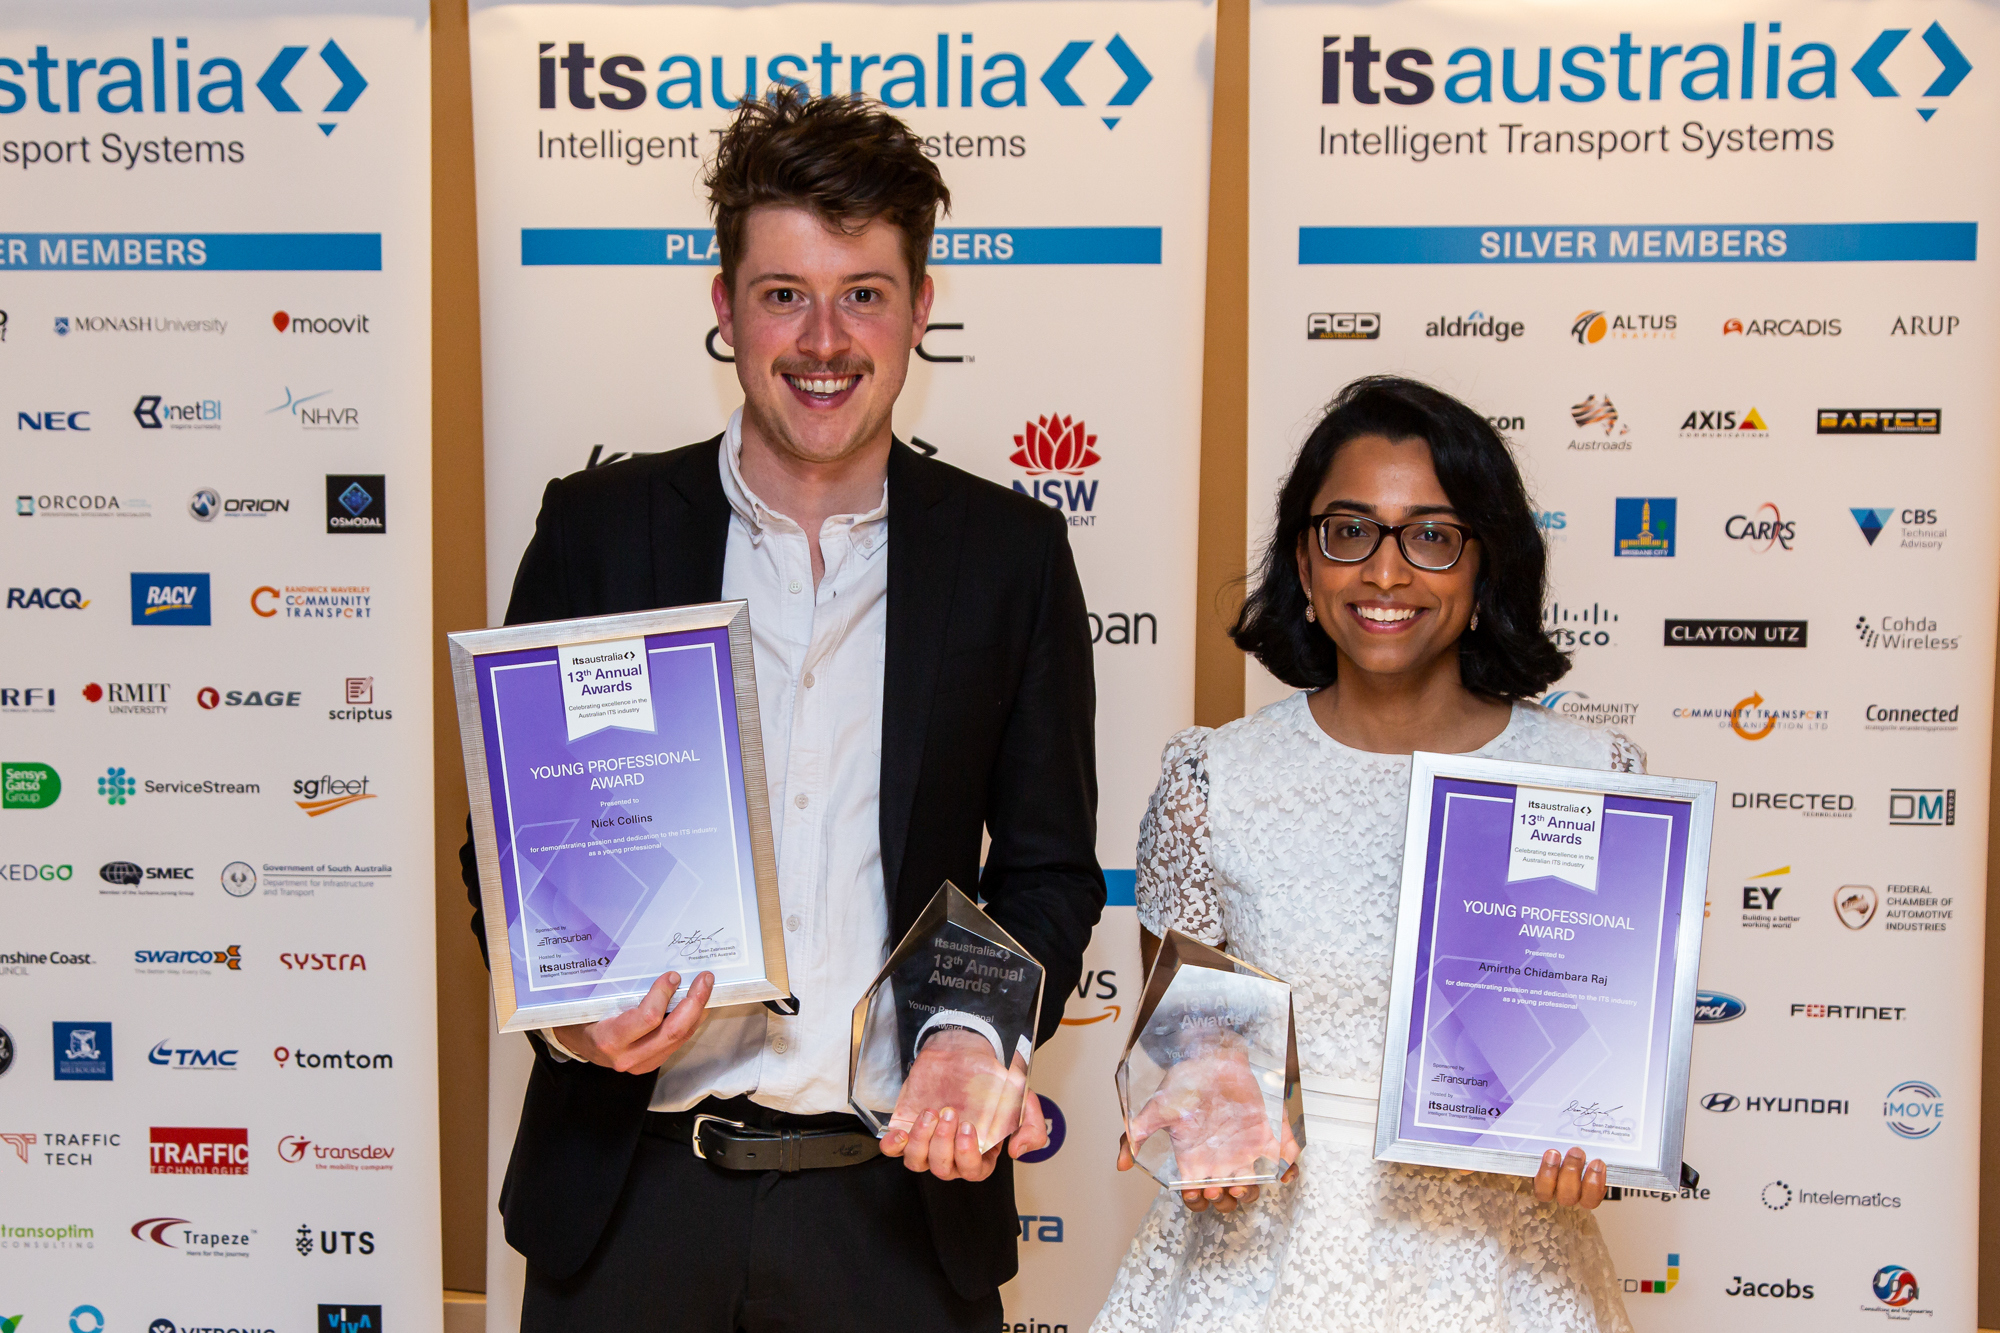 Amirtha Raj, Arcadis and Nick Collins, The Victorian Department of Transport and Planning tied, both winning the Young Professional Award.